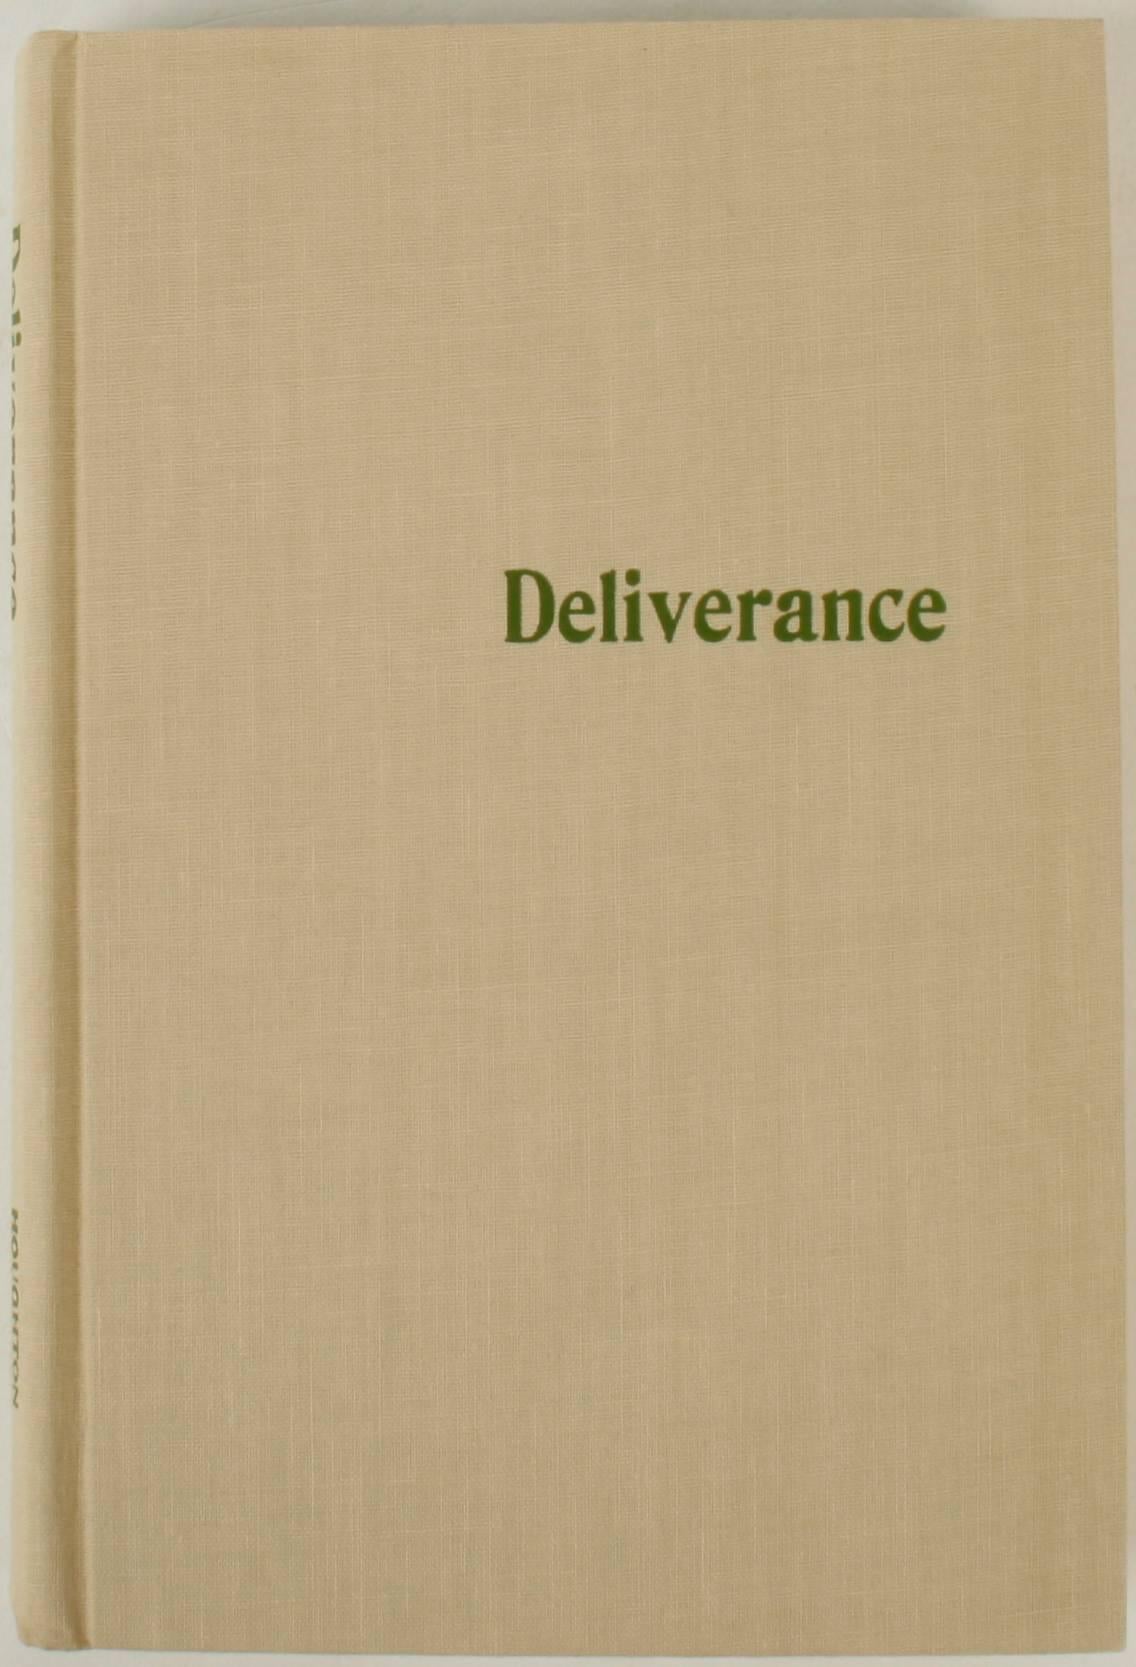 Paper Deliverance by James Dickey, First Edition For Sale